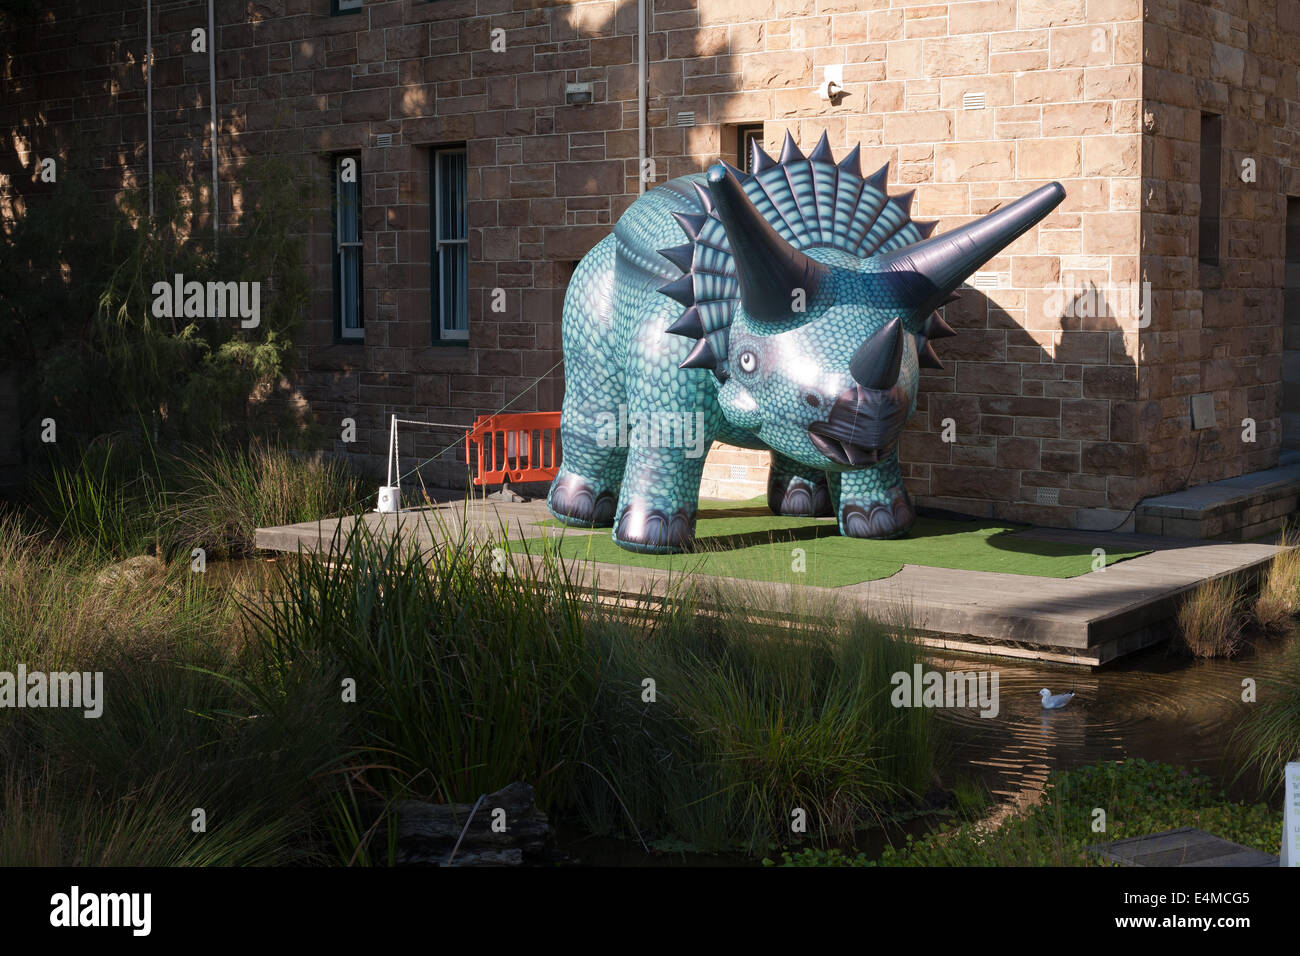 Inflatable blow up toy dinosaur being used to promote the Dinasour Discovery event at the Perth museum, Western Australia, 2014. Stock Photo